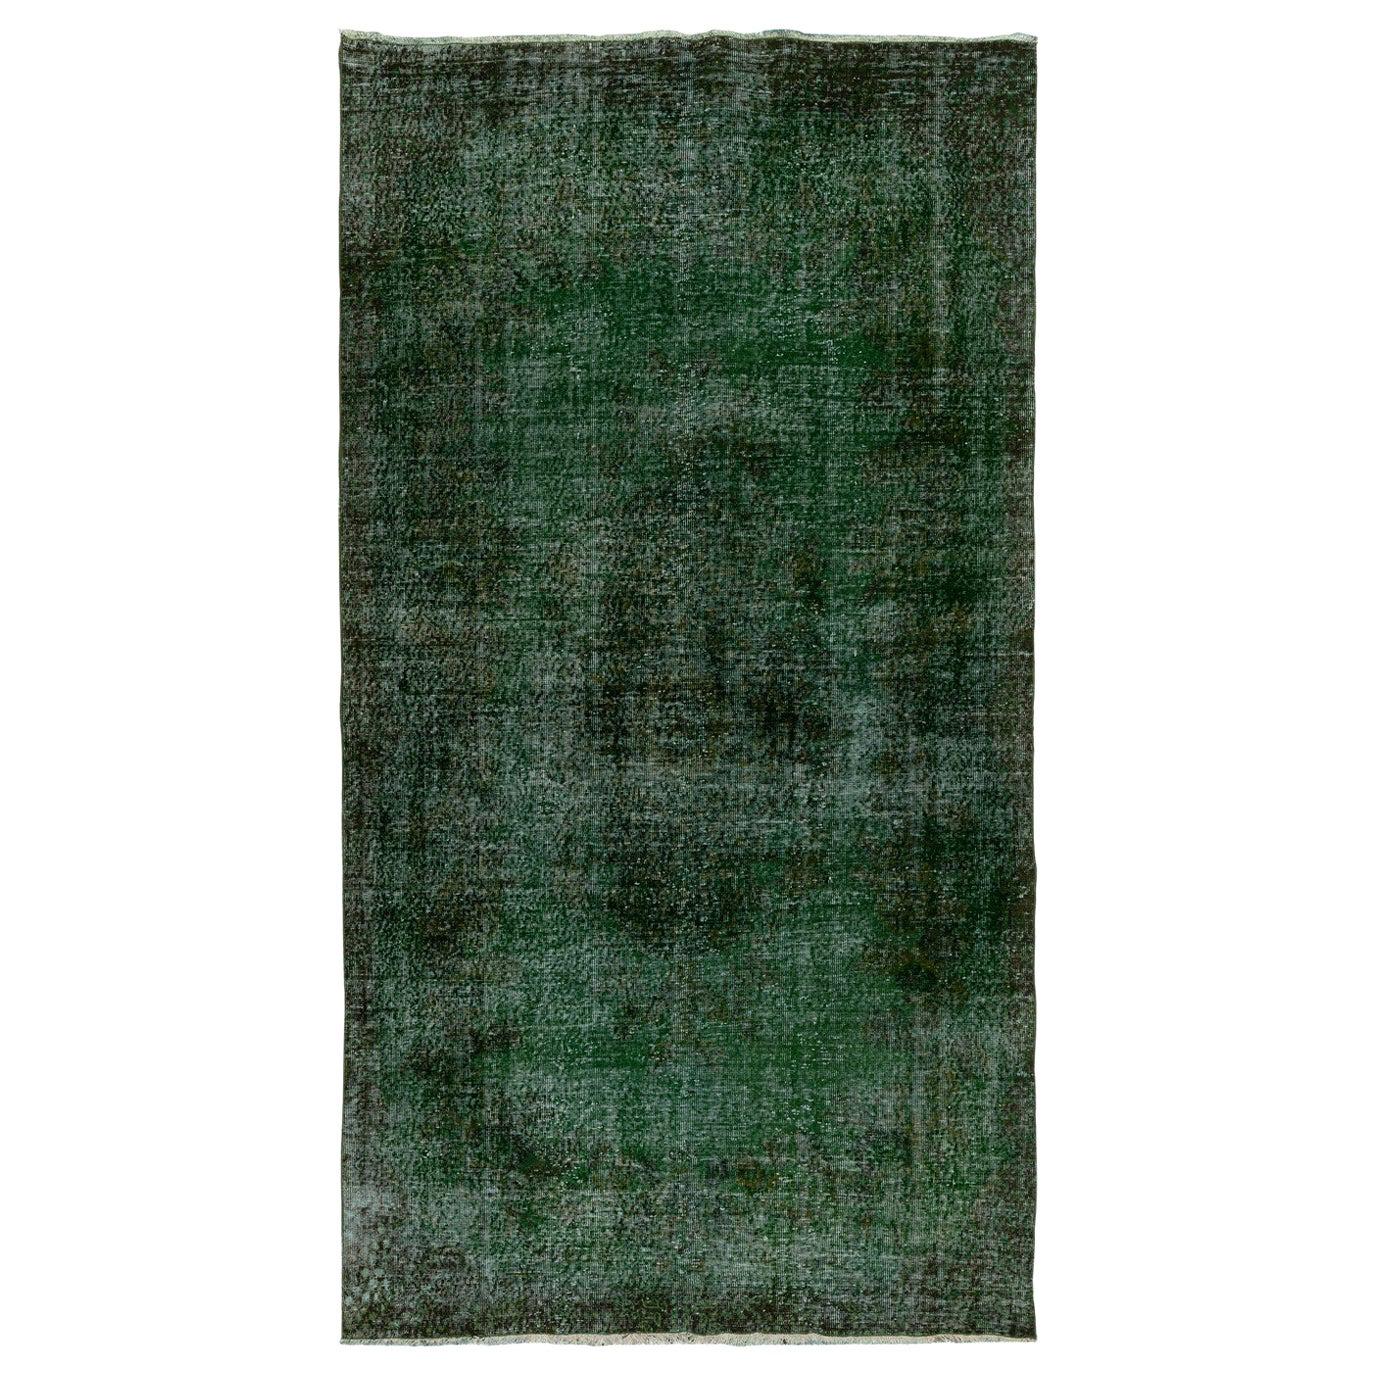 6x11 Ft Distressed Vintage Handmade Rug in Green Color. Modern Anatolian Carpet For Sale